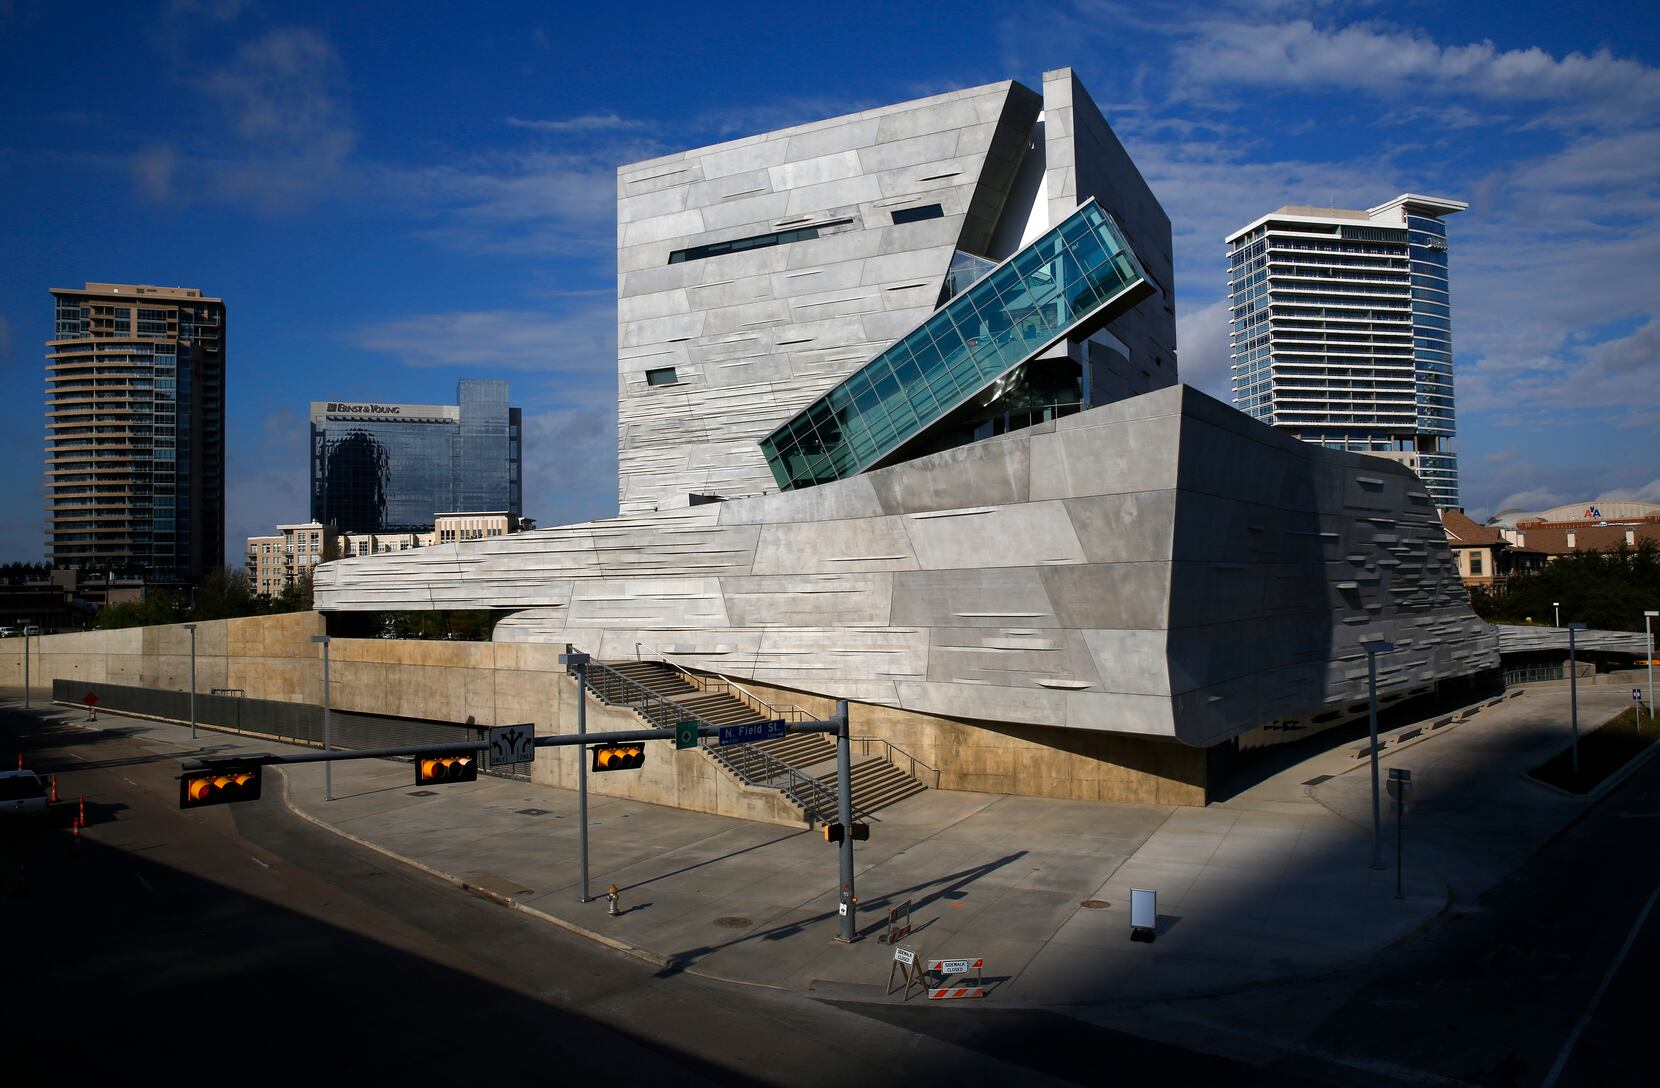 Louis Vuitton to hold shopping event at Perot Museum